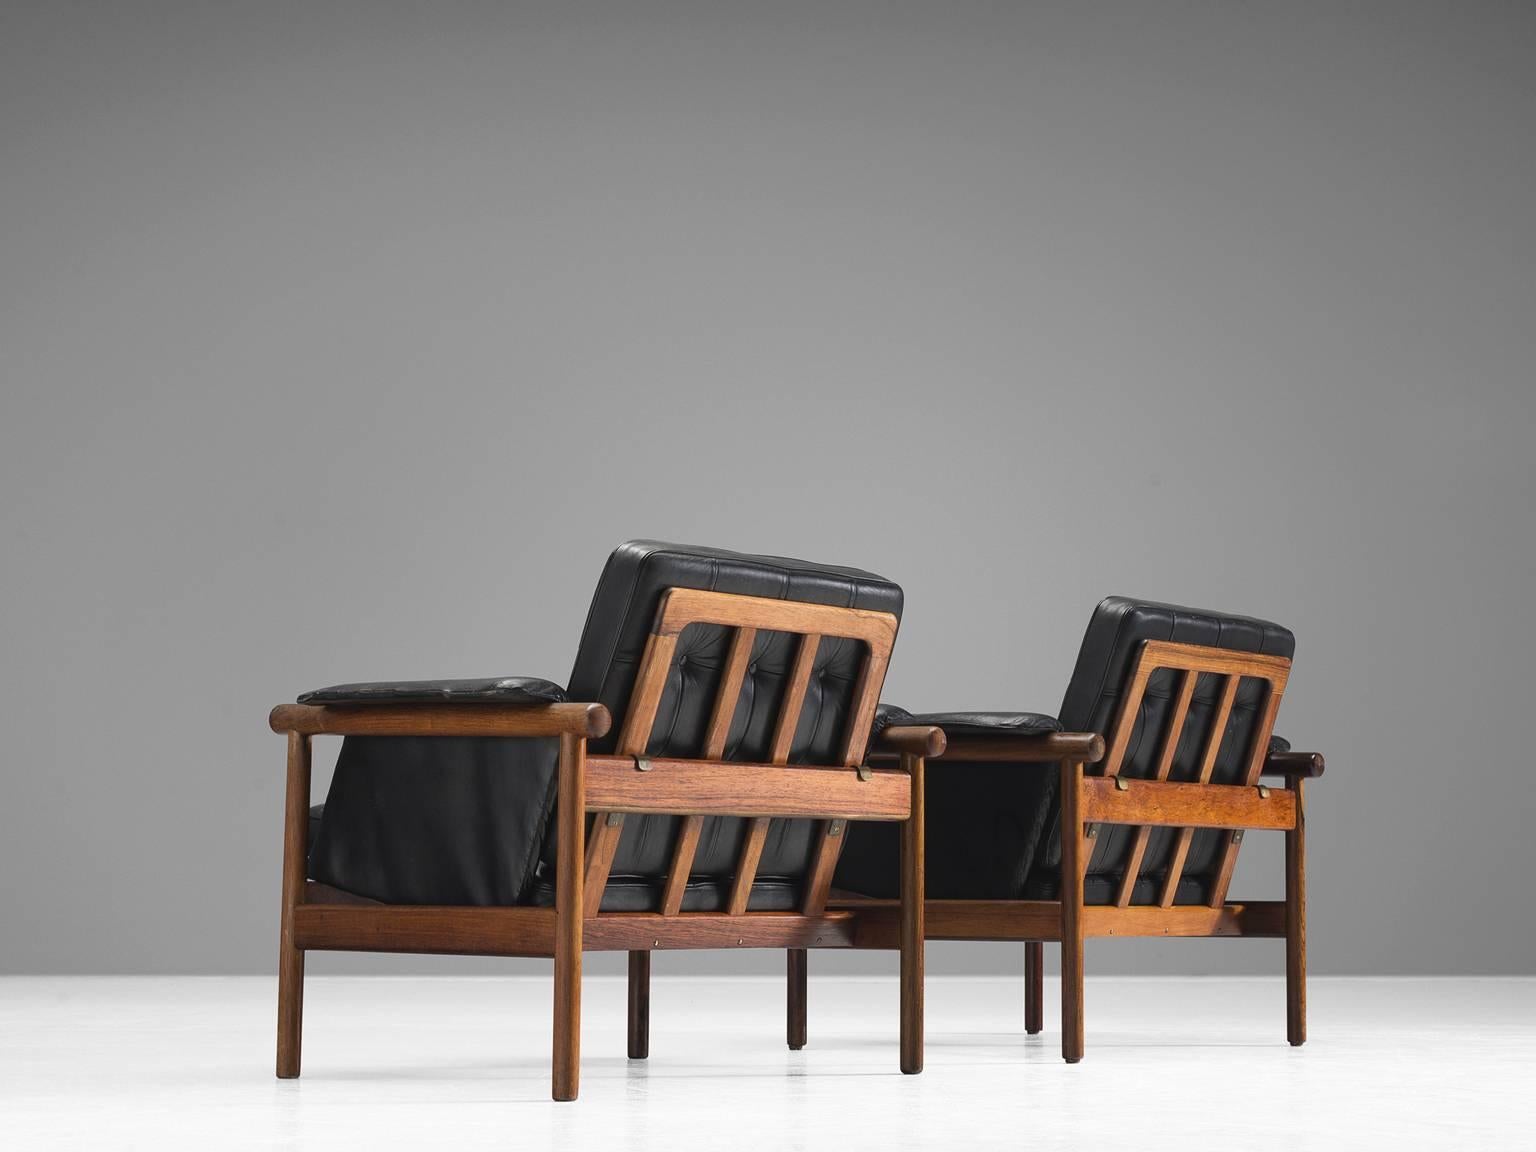  Illum Wikkelsø by Koefoed's Møbelfabrik, pair of 'Wiki' easy chairs, black leather and rosewood, Denmark, ca. 1966.

This set of club like easy chairs feature a rosewood frame with slatted back and an angular, geometric frame. The chairs are named